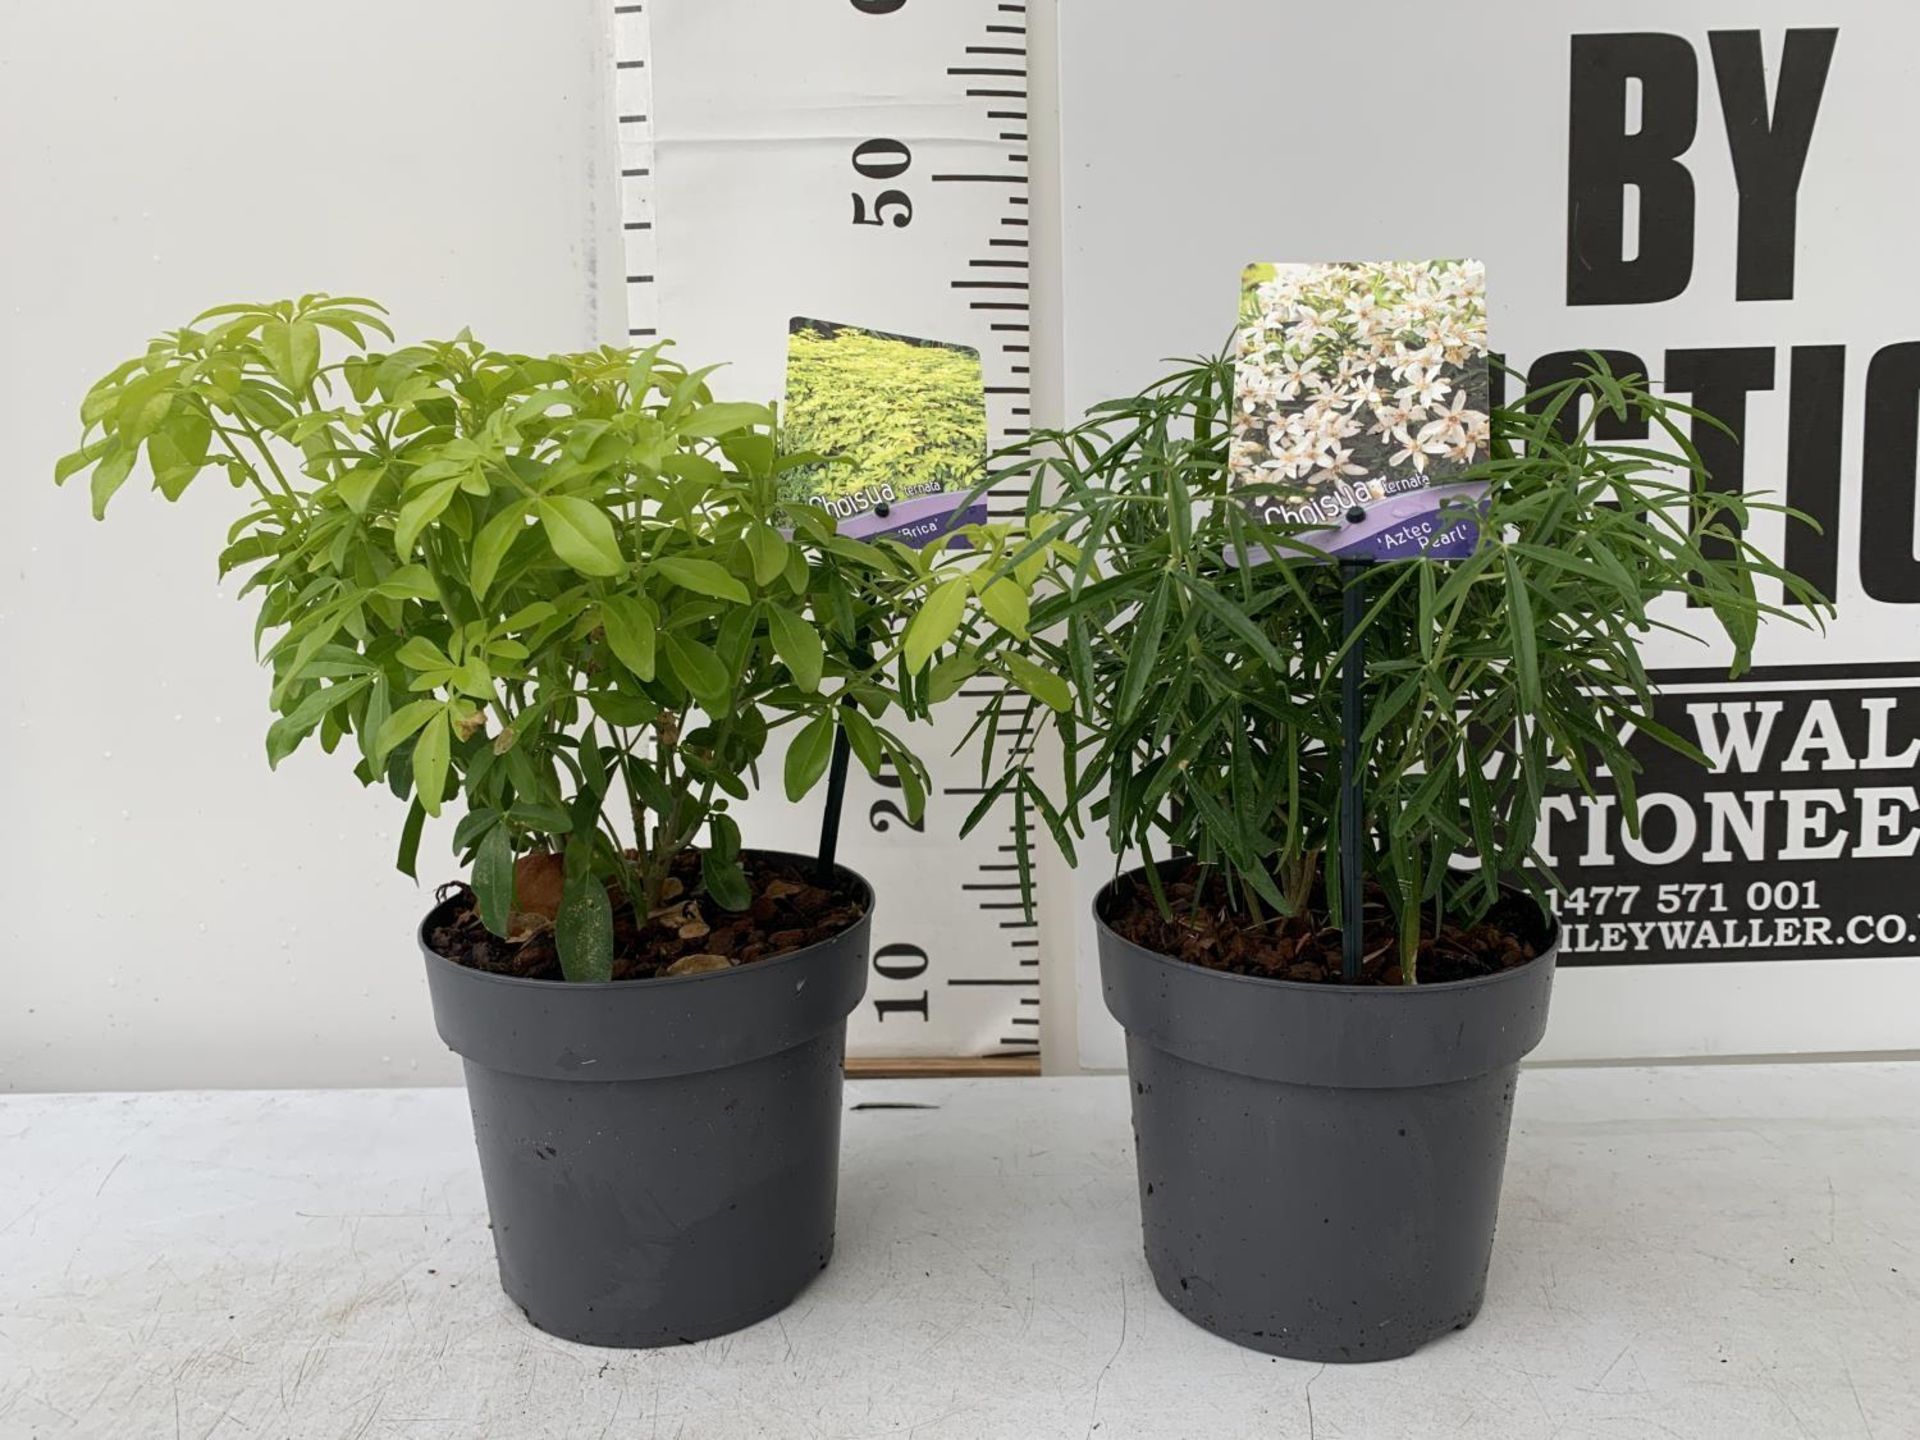 TWO CHOISYA TERNATA PLANTS 'BRICA' AND 'AZTEC PEARL' 40CM IN HEIGHT IN 2 LTR POTS PLUS VAT TO BE